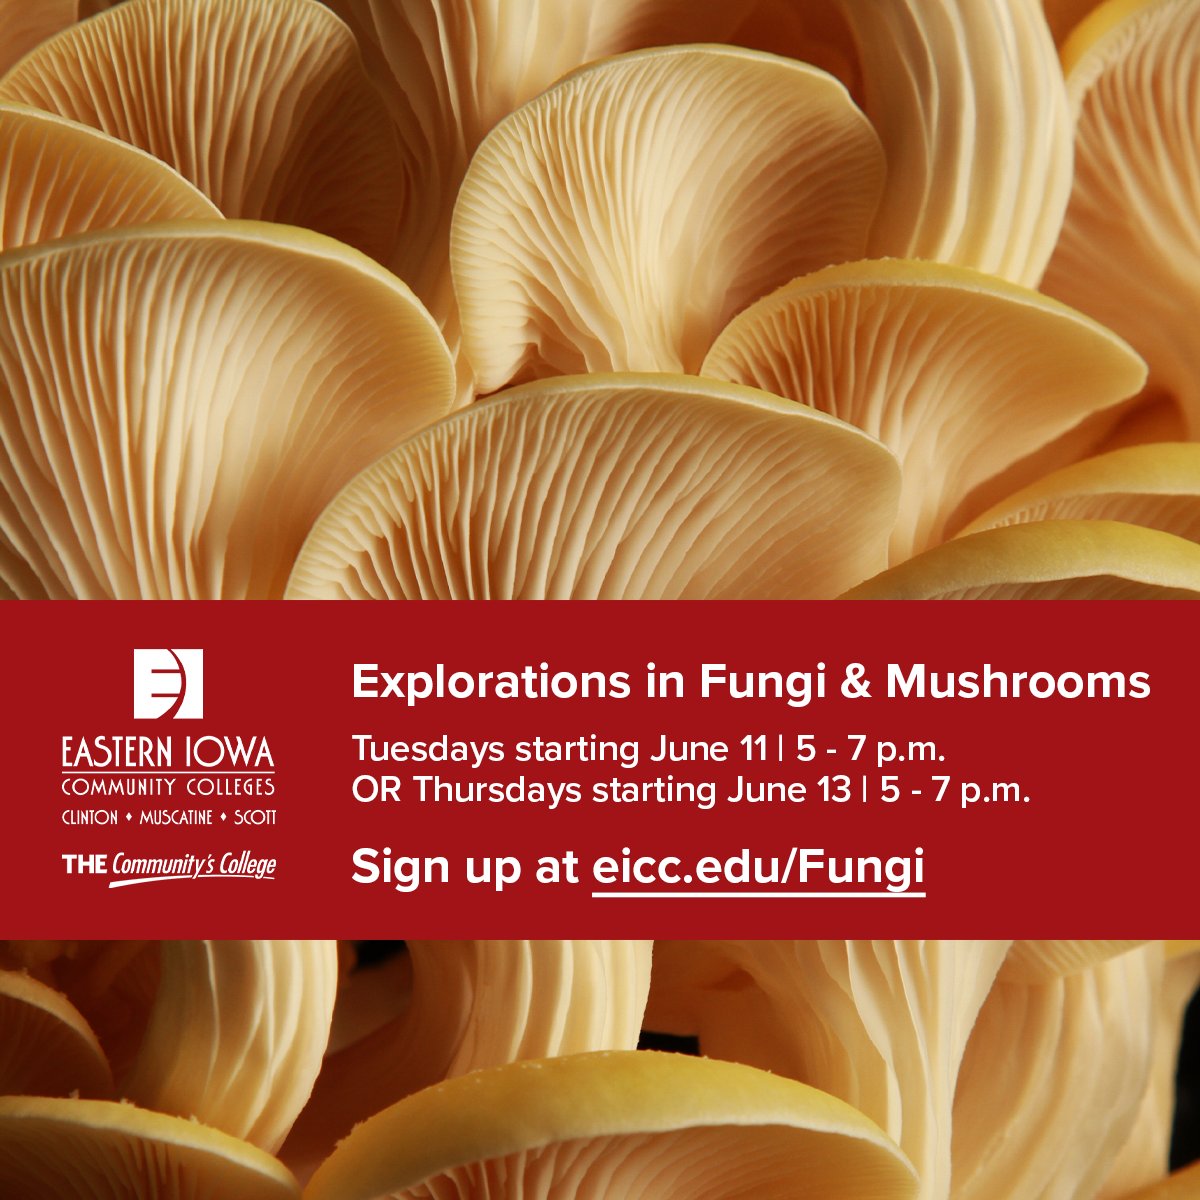 Learn how to observe, document, collect, and catalog the fungi in our region.

‌Register now at eicc.edu/Fungi

#THECommunitysCollege #mushrooms🍄